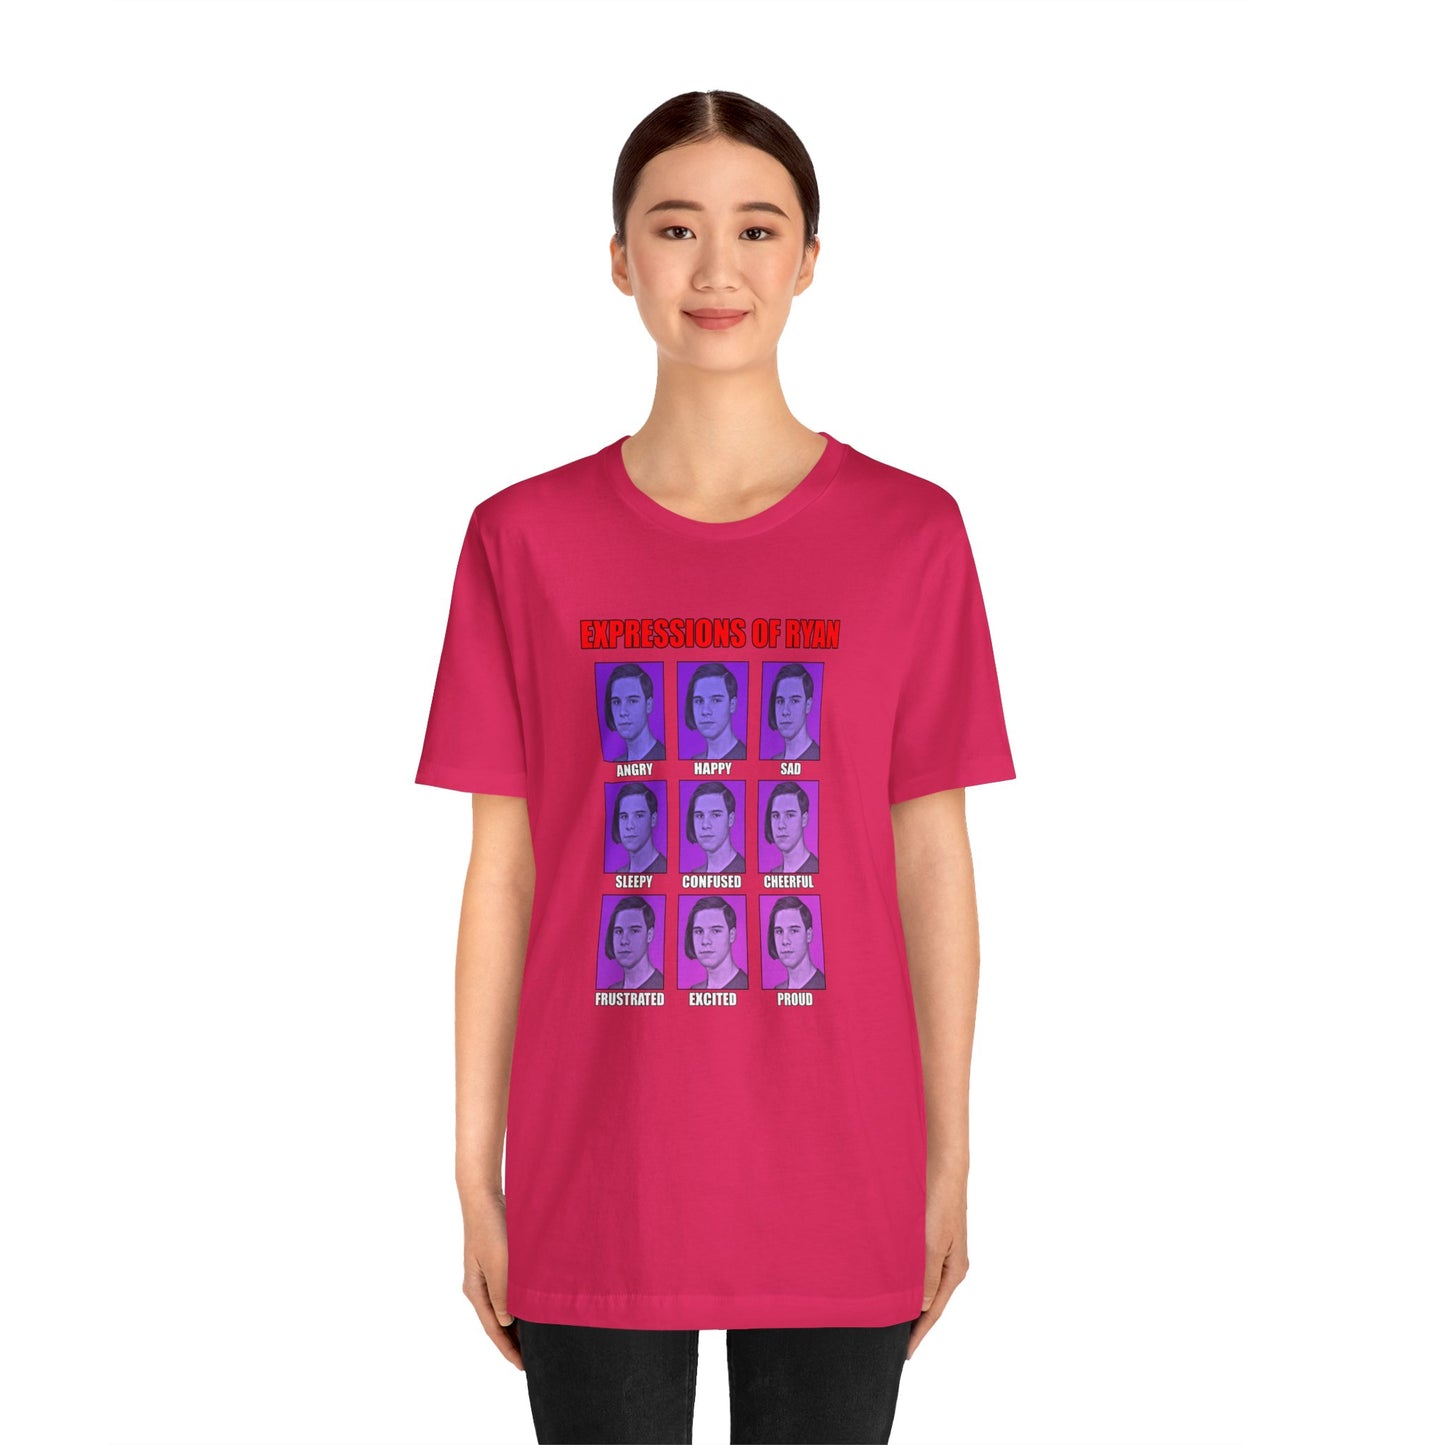 Expressions Of RYAN - Limited Edition - T-shirt - US